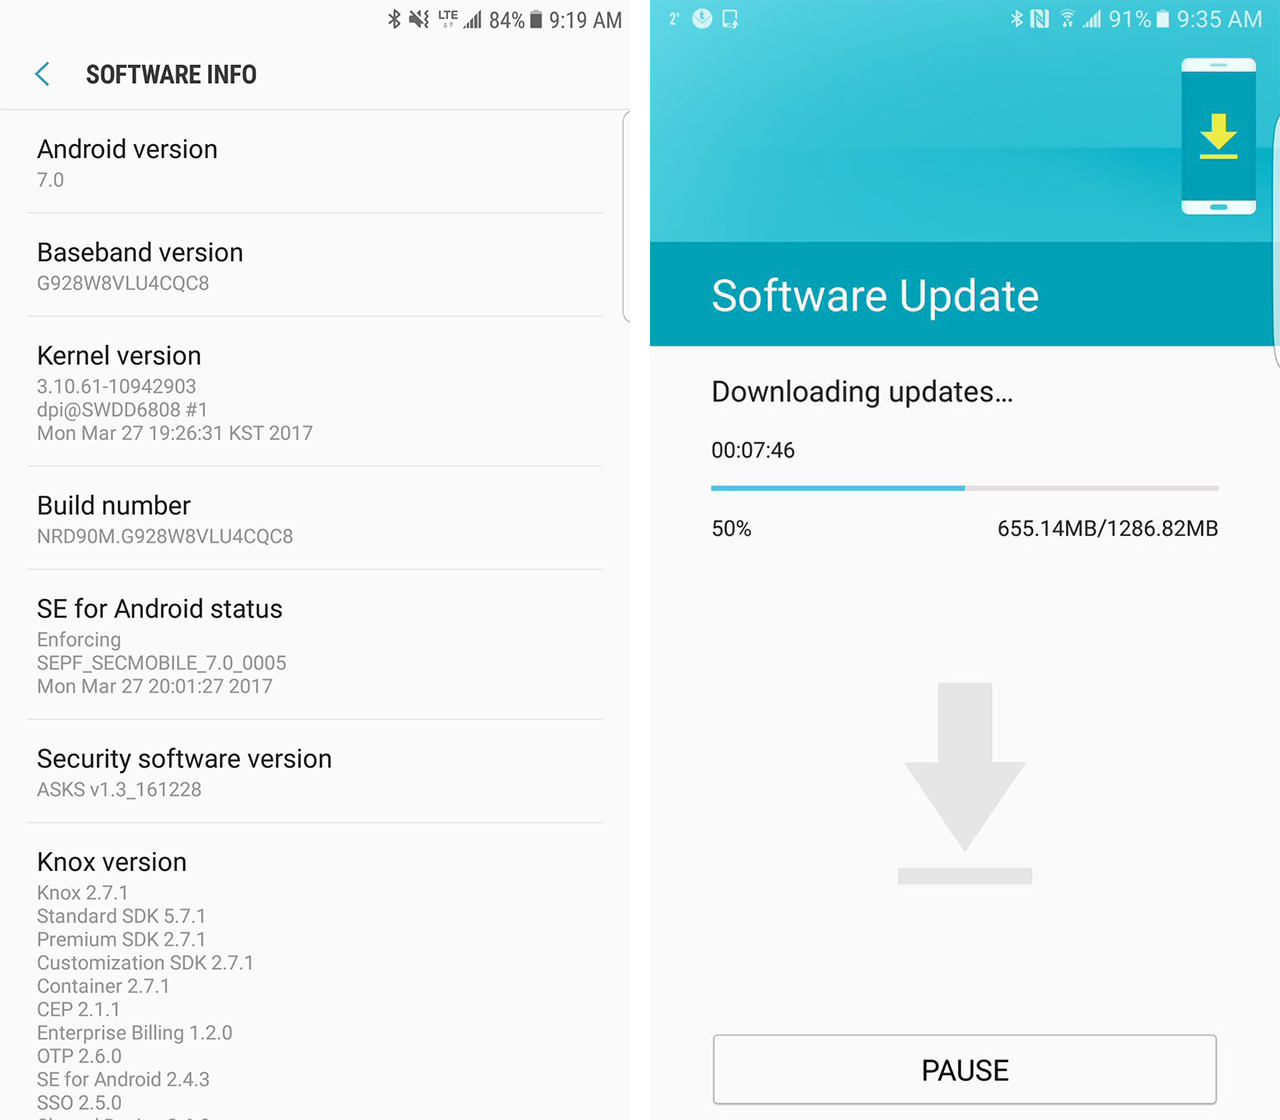 Galaxy S6 edge+ downloading Android Nougat